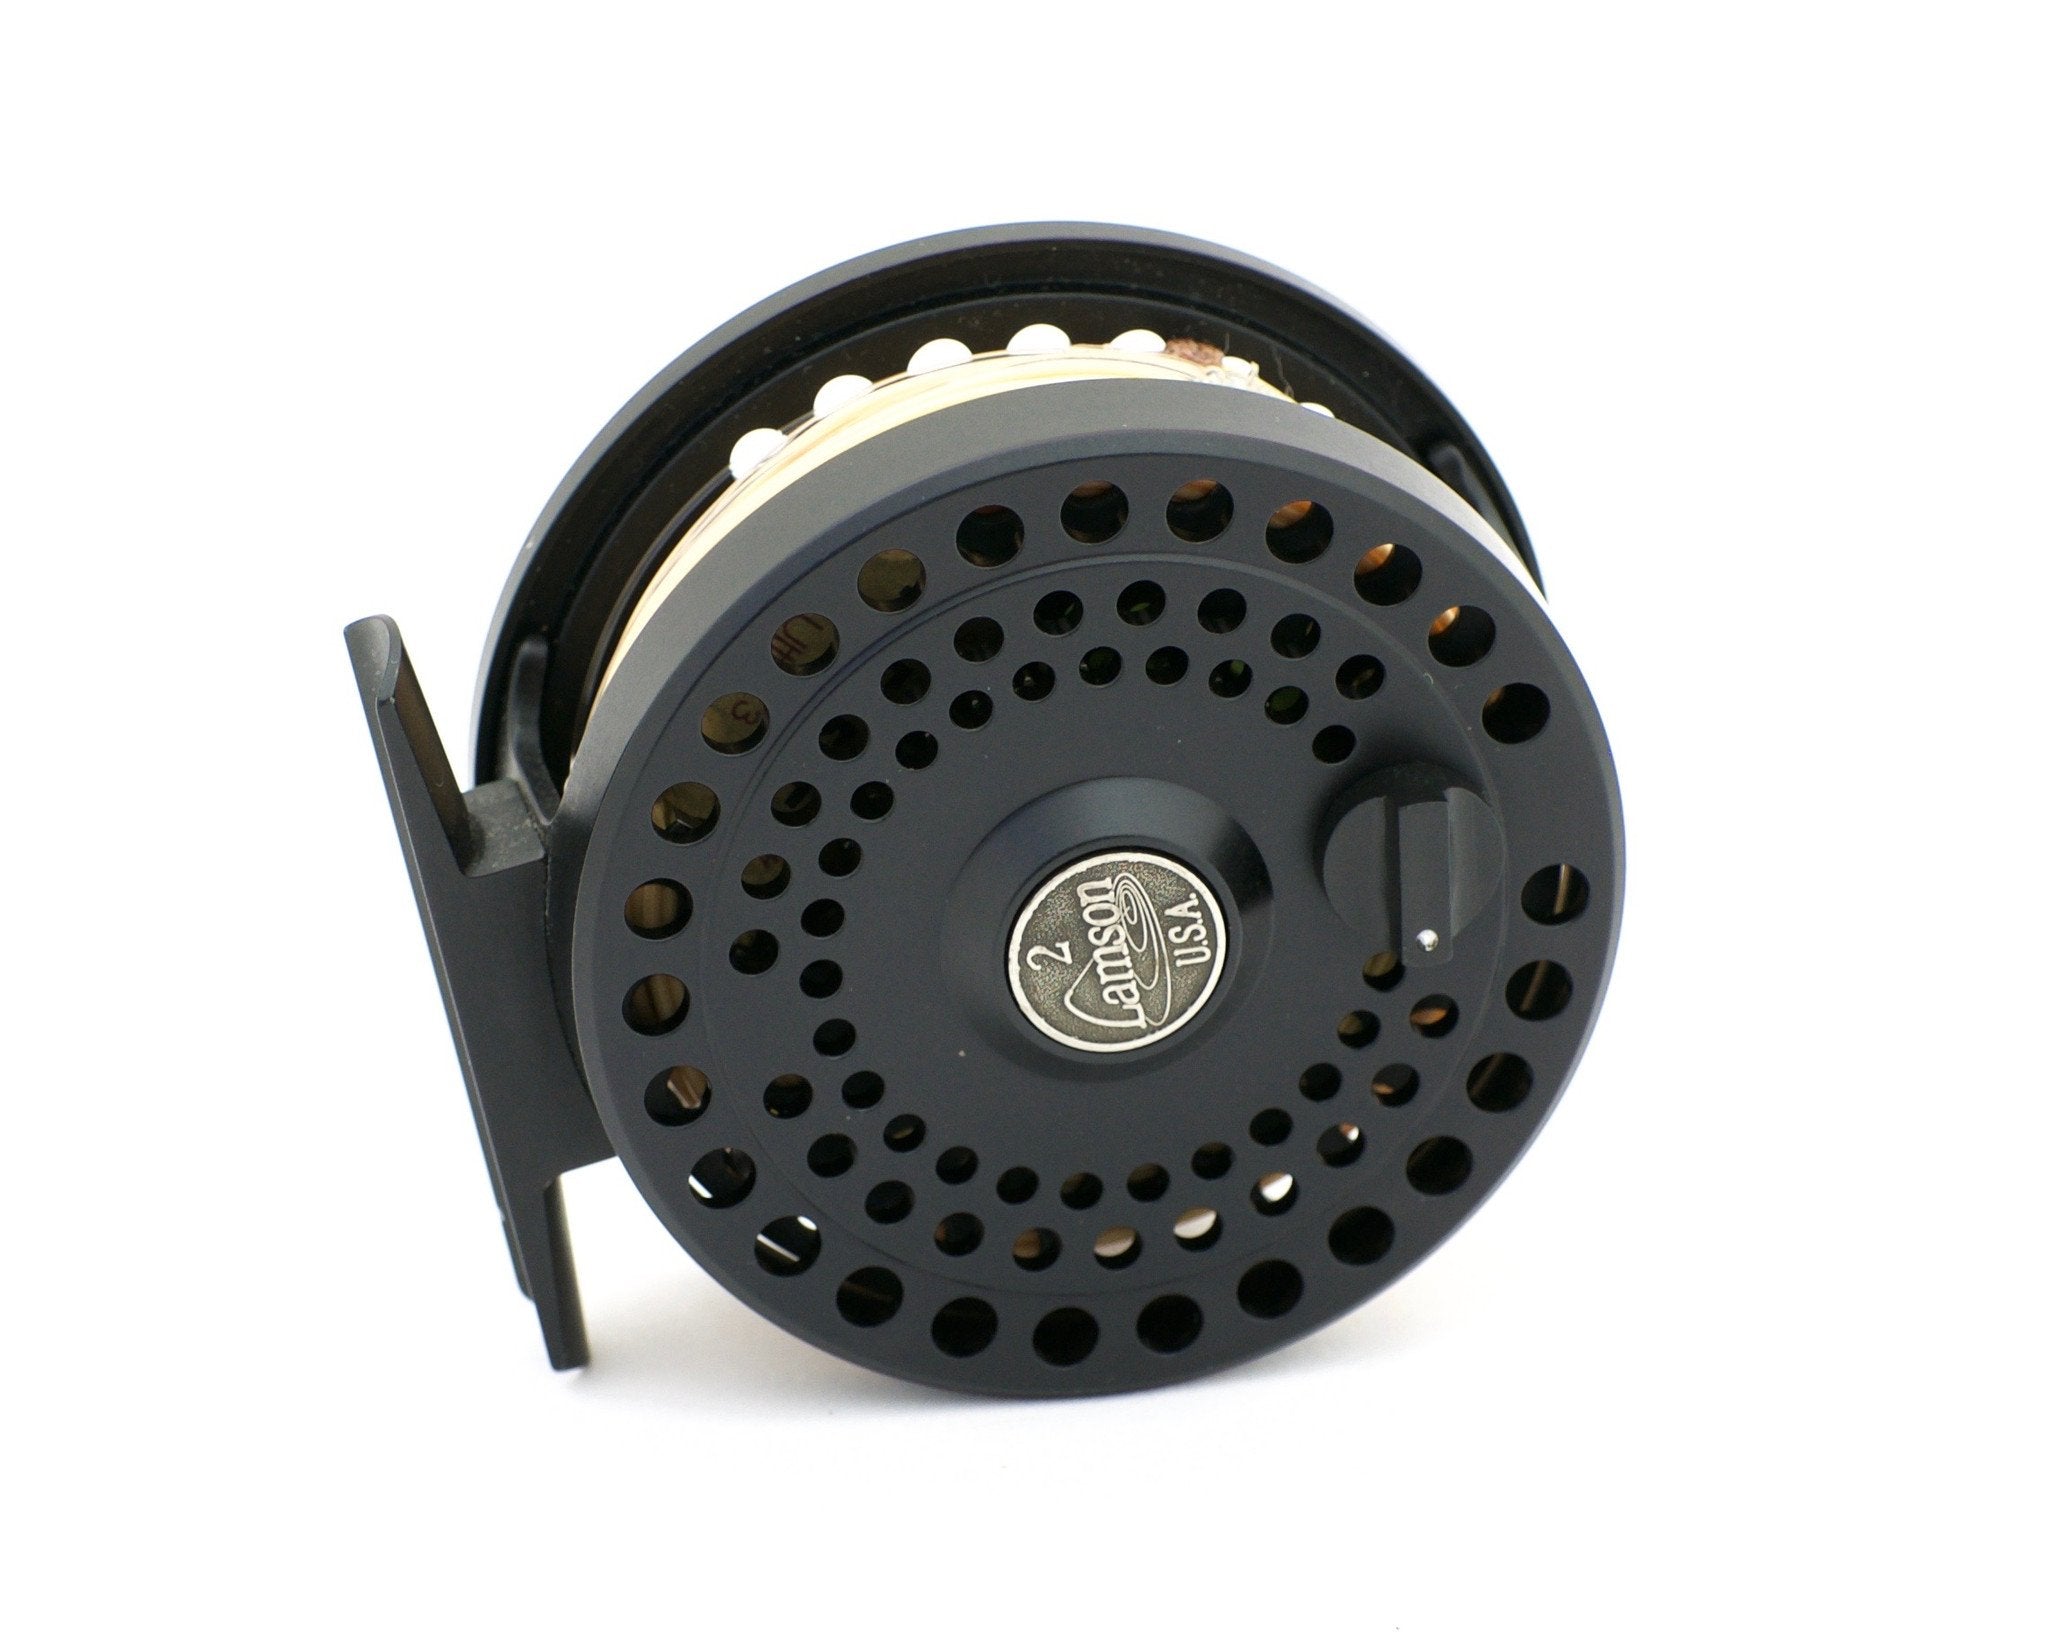 First Cast Fly Fishing: Vintage Fly Fishing Reels: Keep it or Toss it?